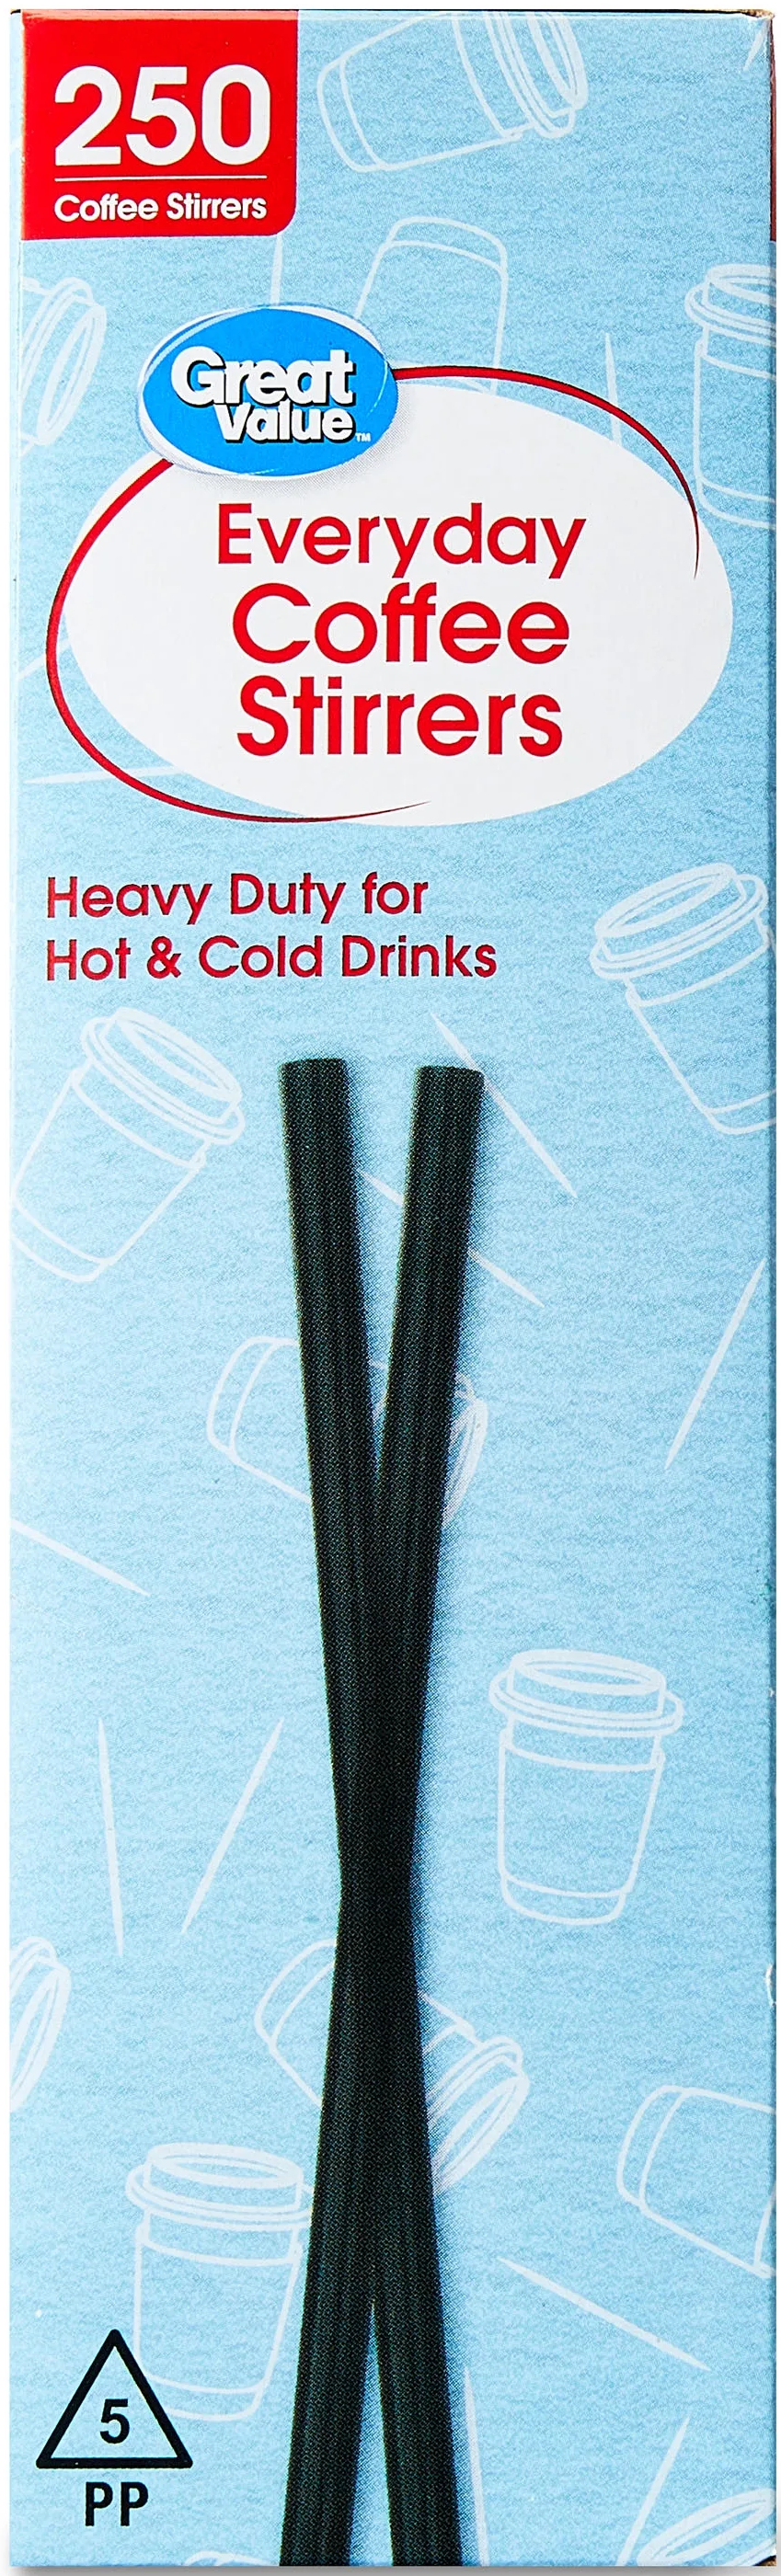 Great Value Everyday Coffee Stirrers 250ct